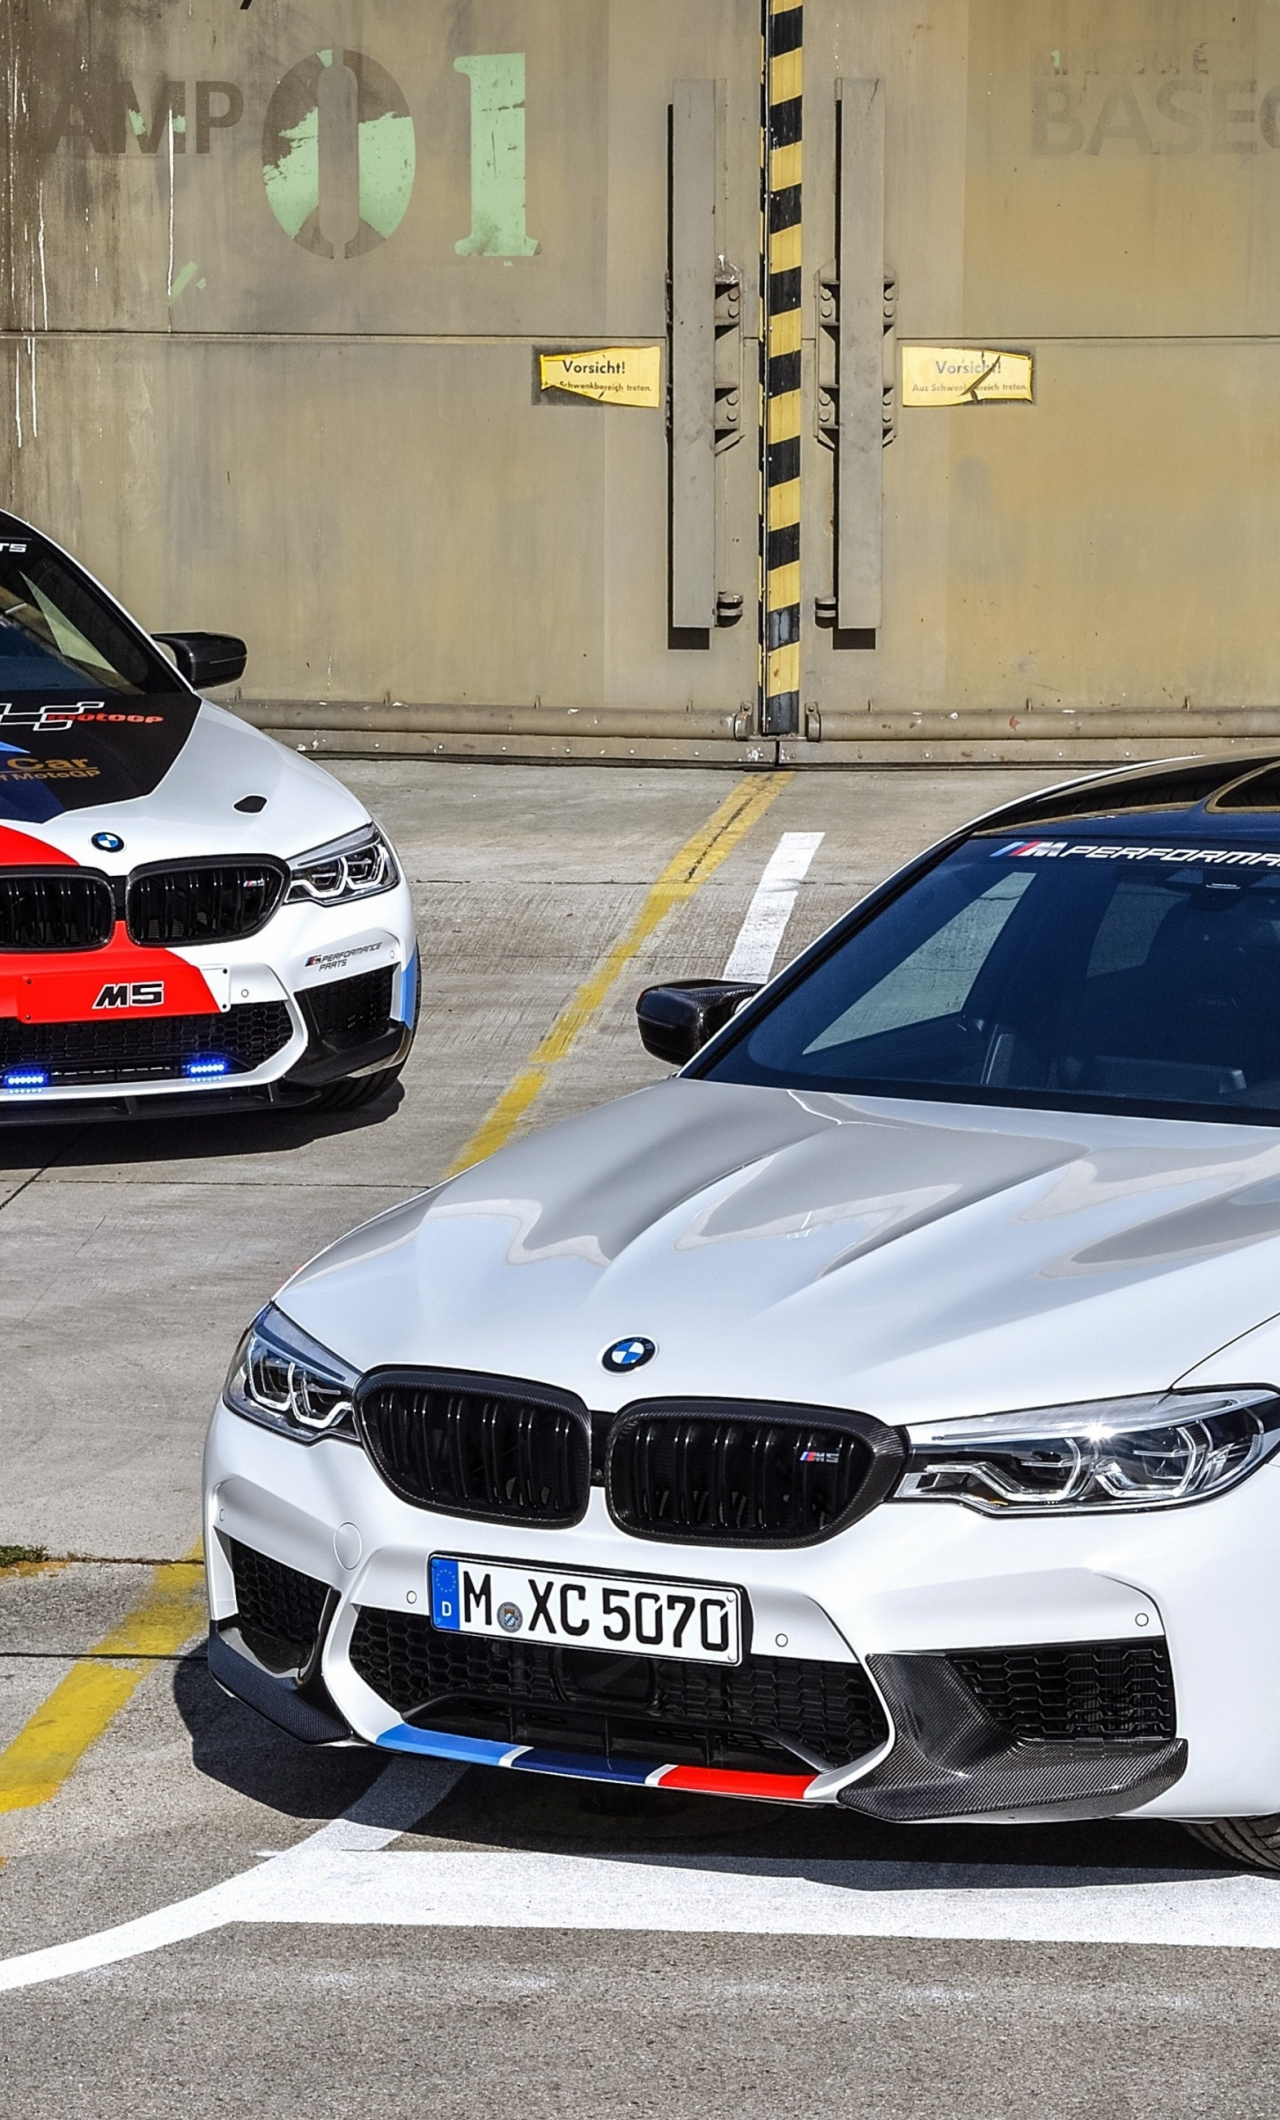 Download cars, bmw m motogp safety cars 1280x2120 wallpaper, iphone 6 plus, 1280x2120 HD image, background, 5720